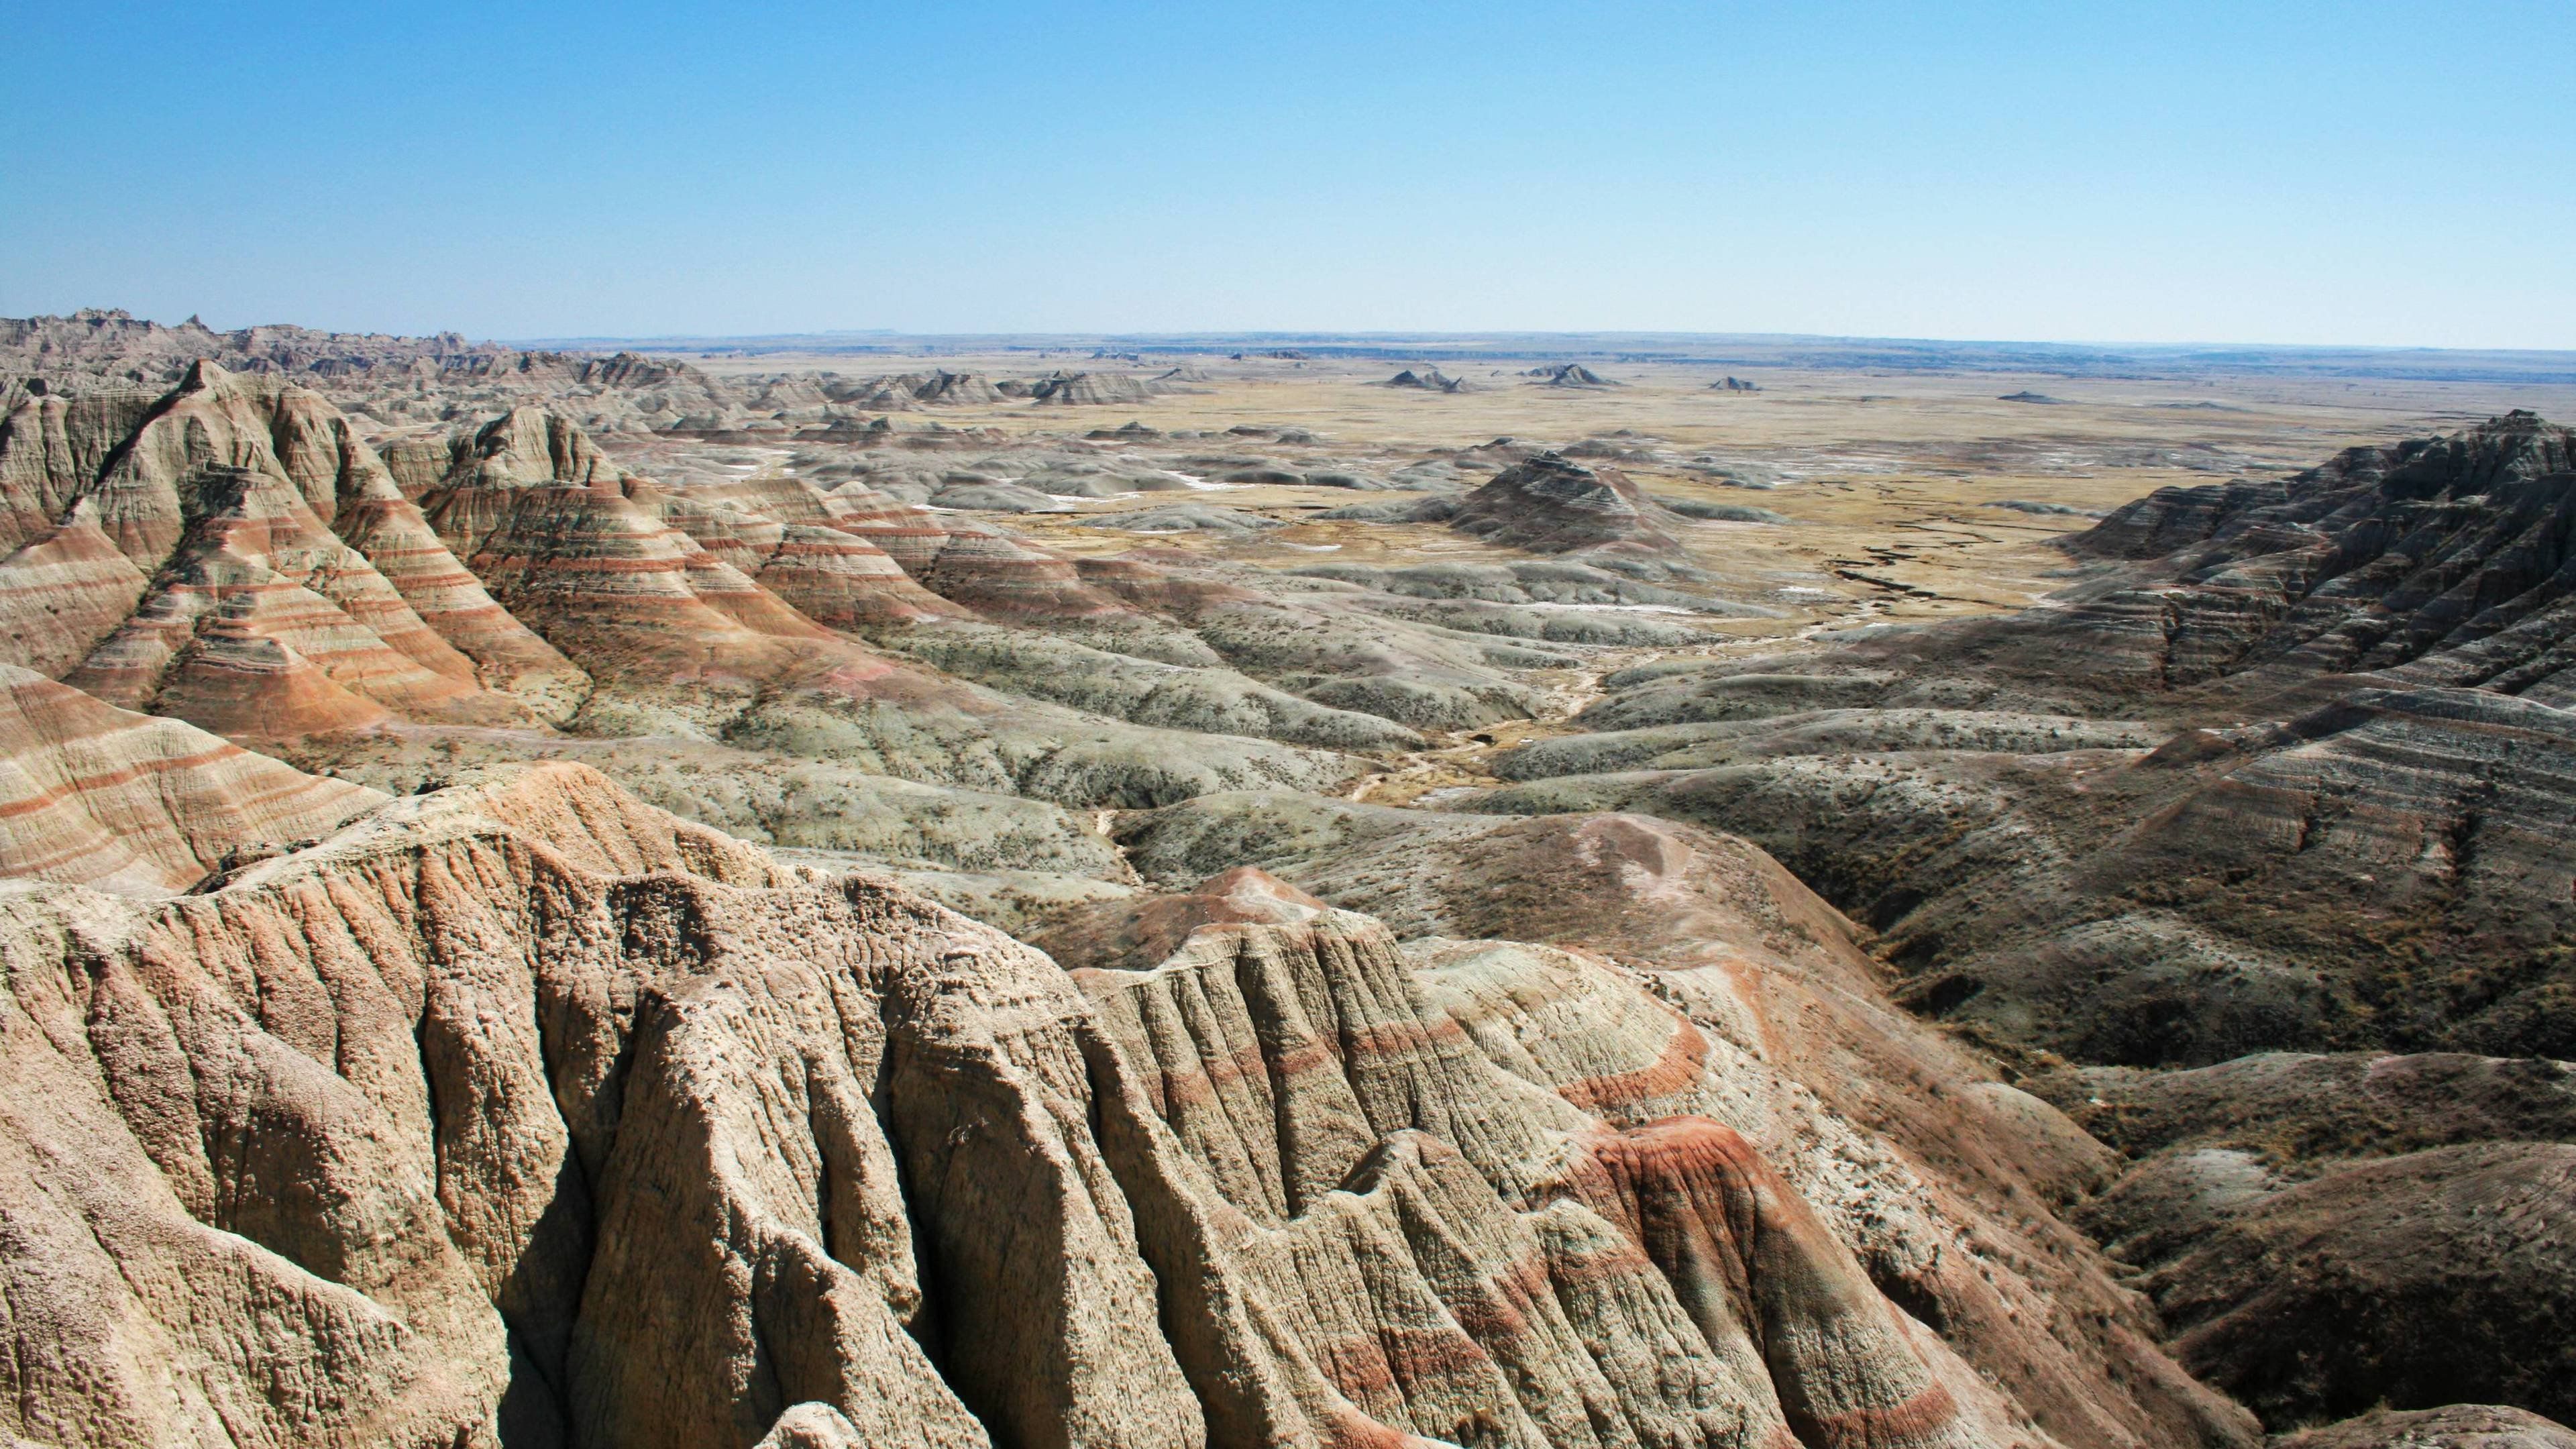 Badlands 4K wallpaper for your desktop or mobile screen free and easy to download